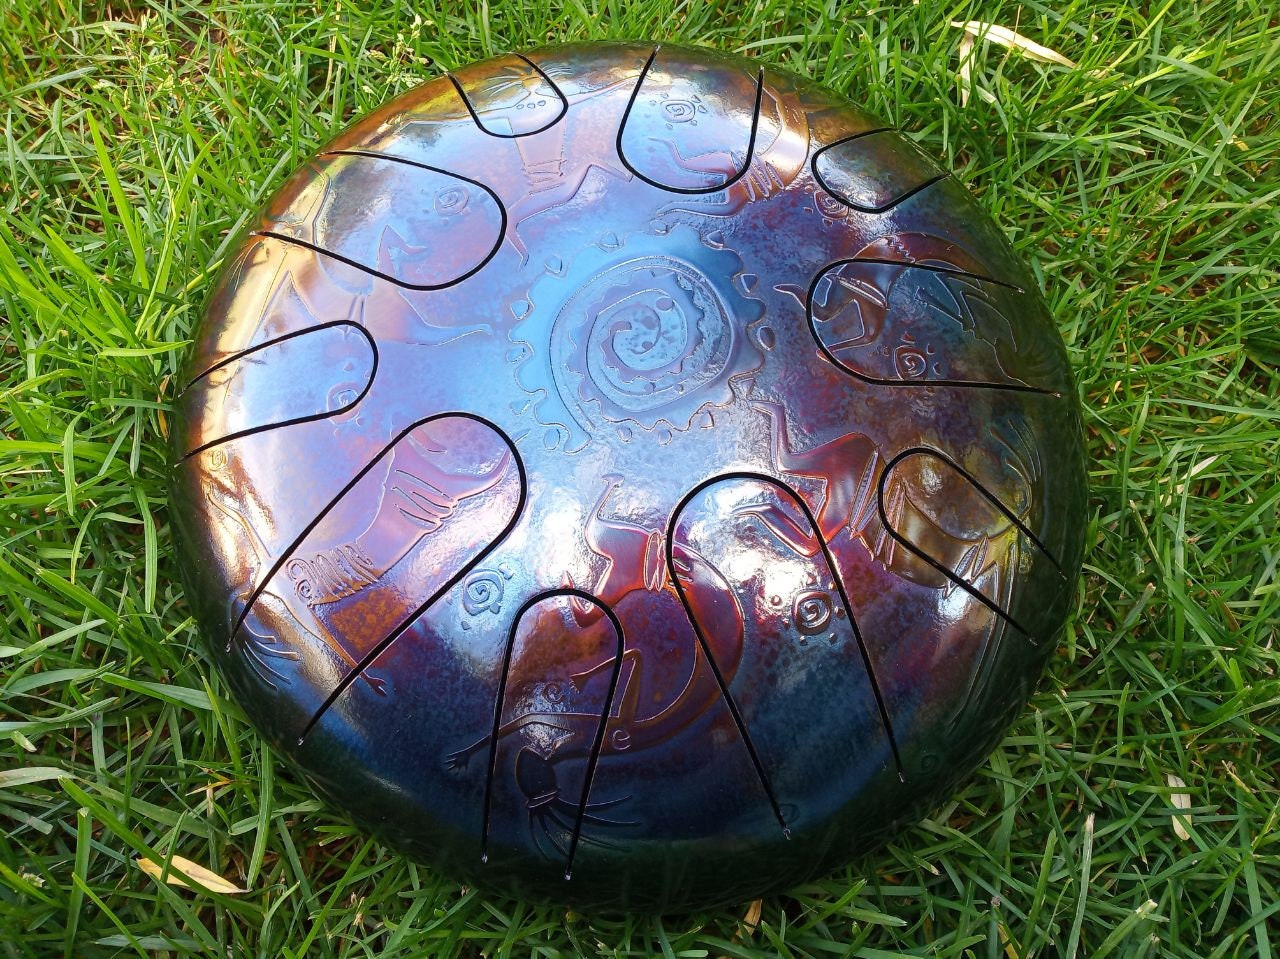 Jamaican handpan business part of musical obsession